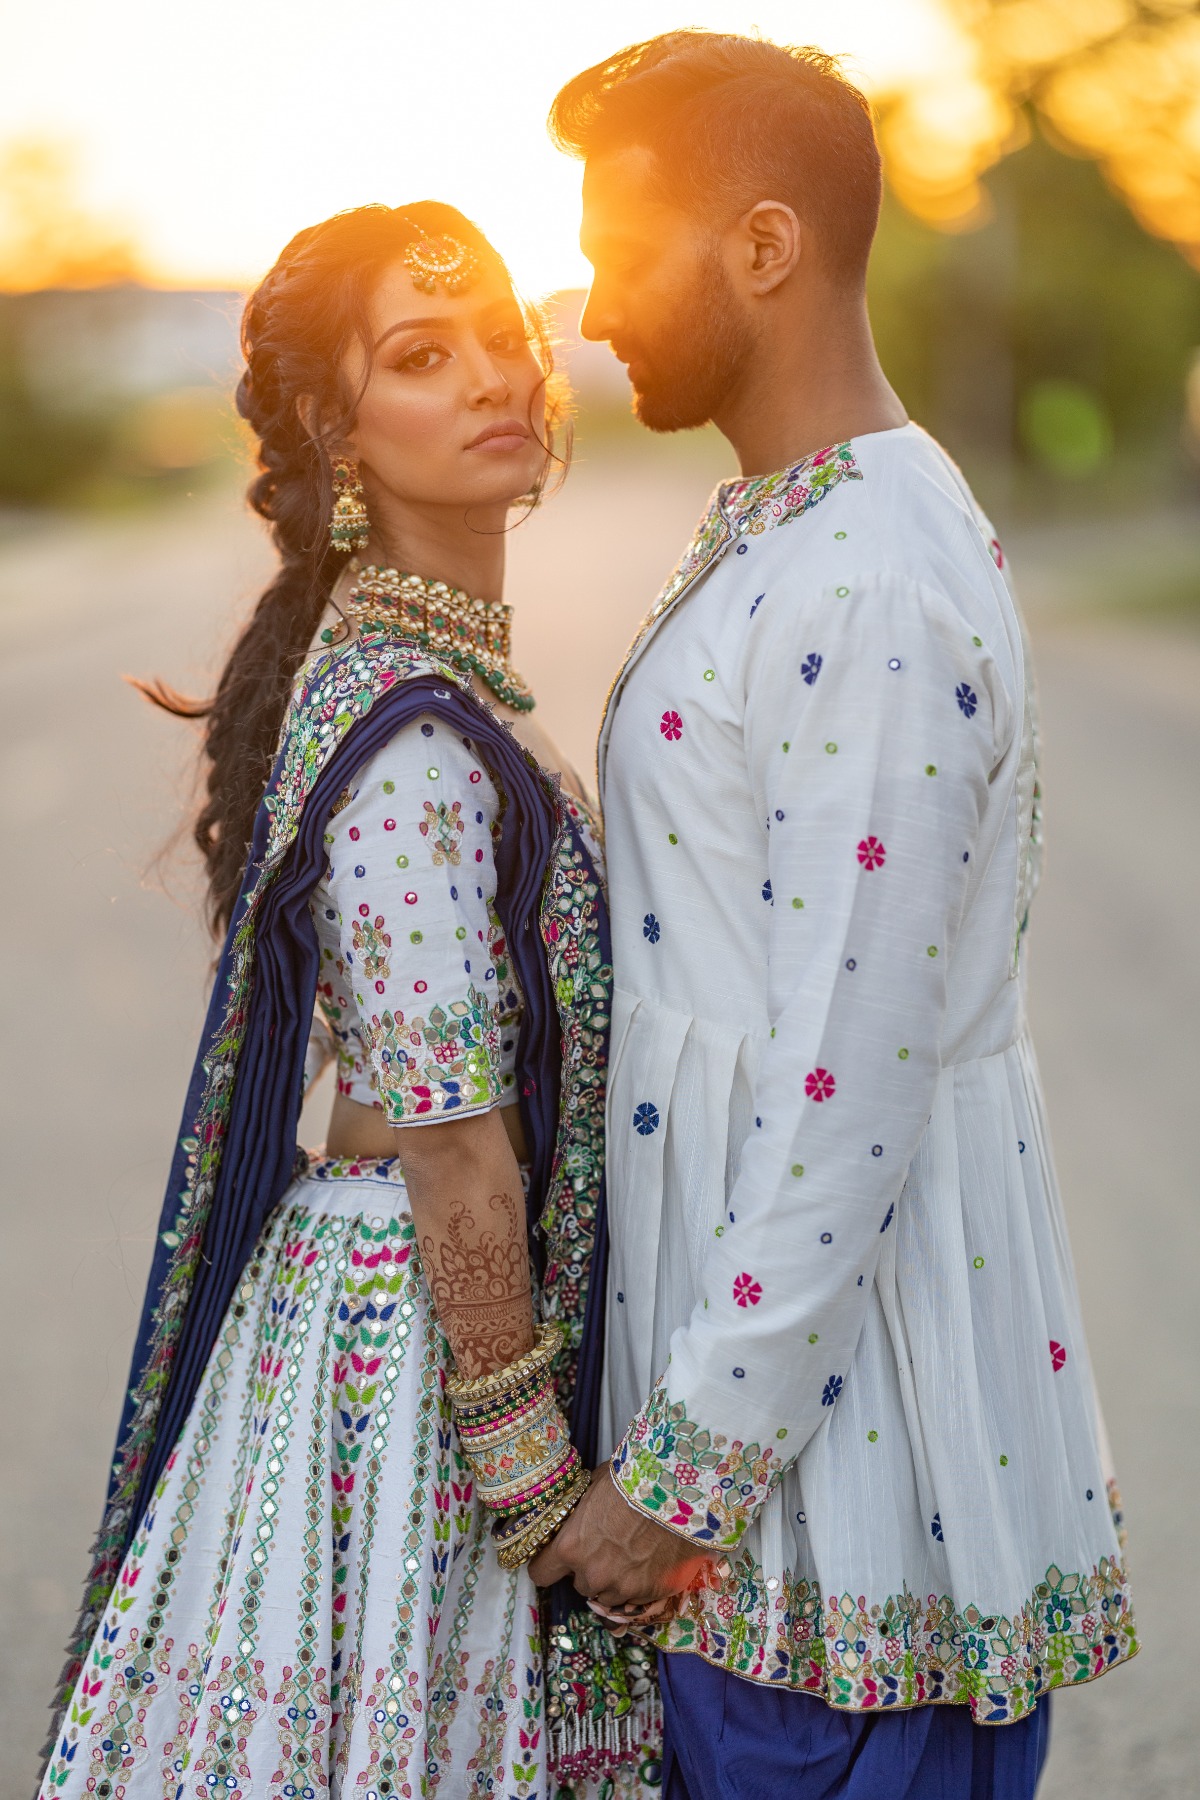 Portrait of bride and groom at golden hour